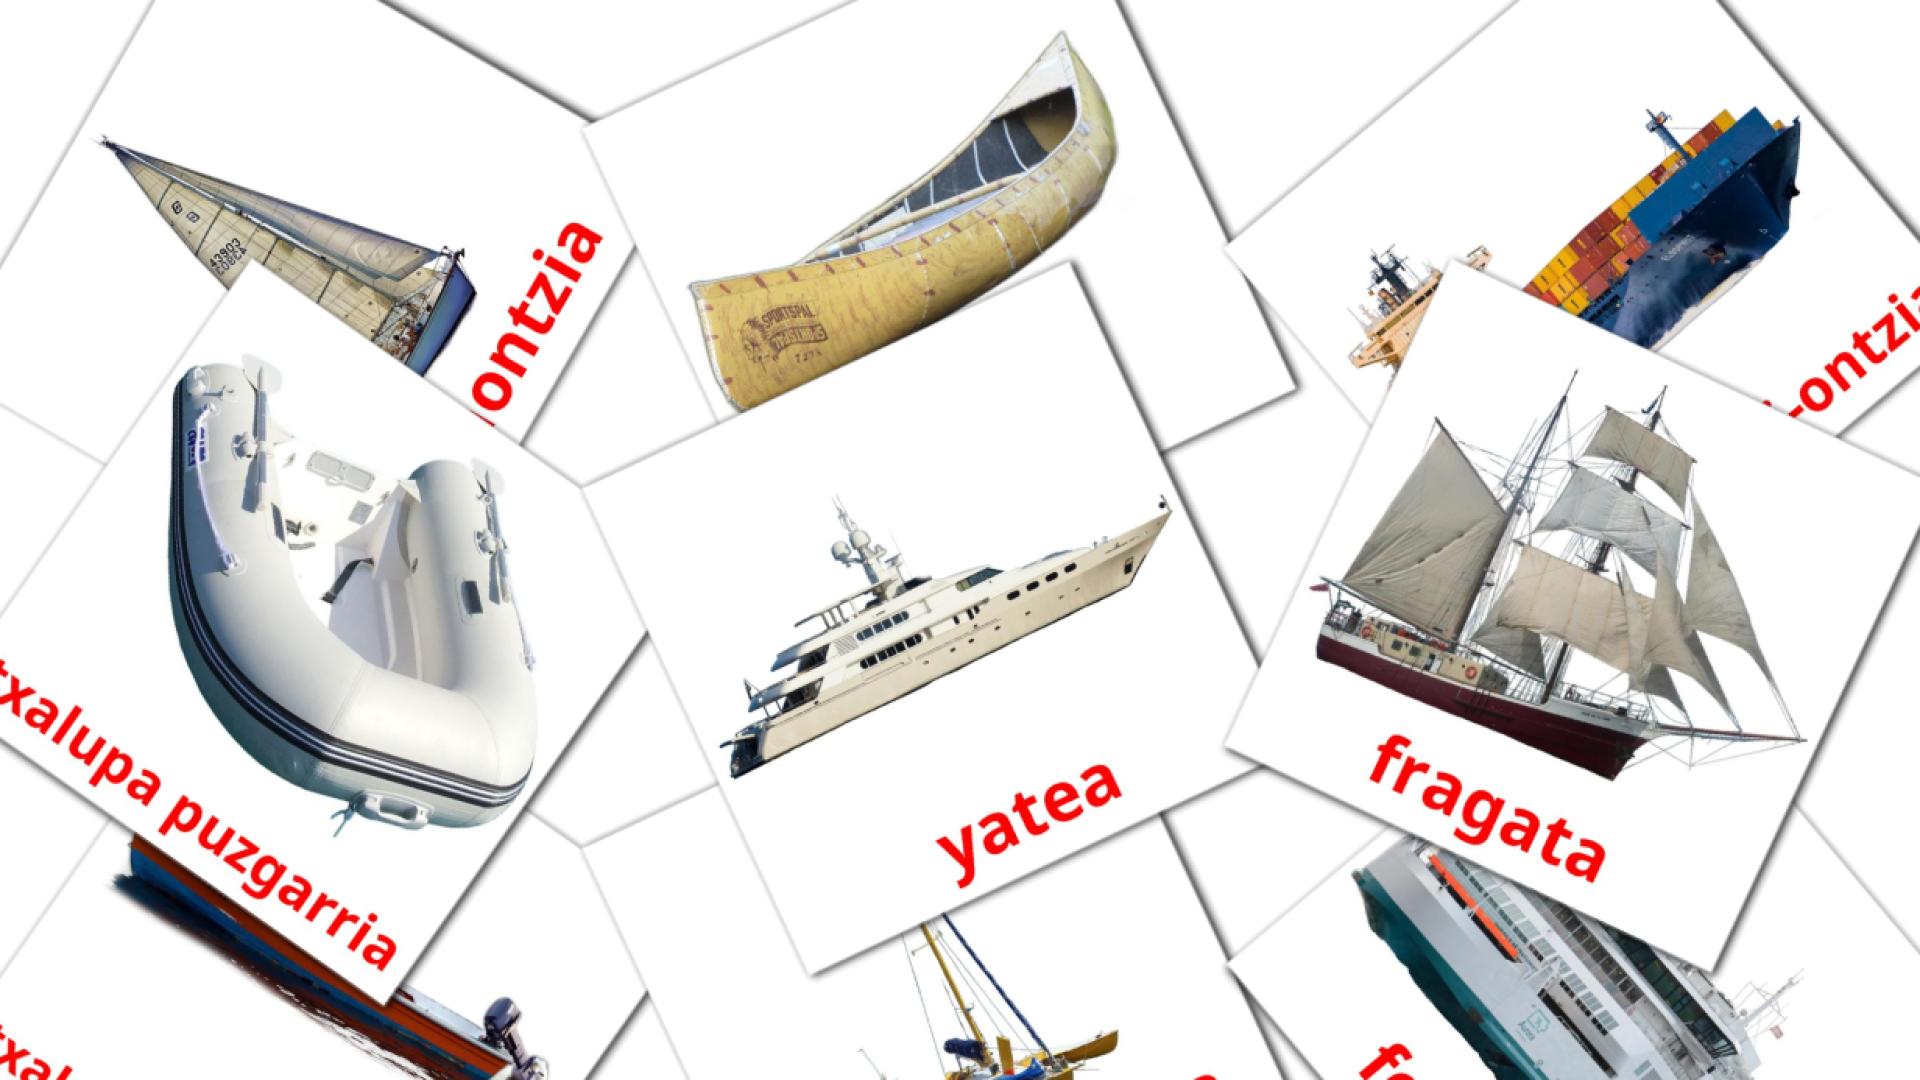 Water transport - basque vocabulary cards